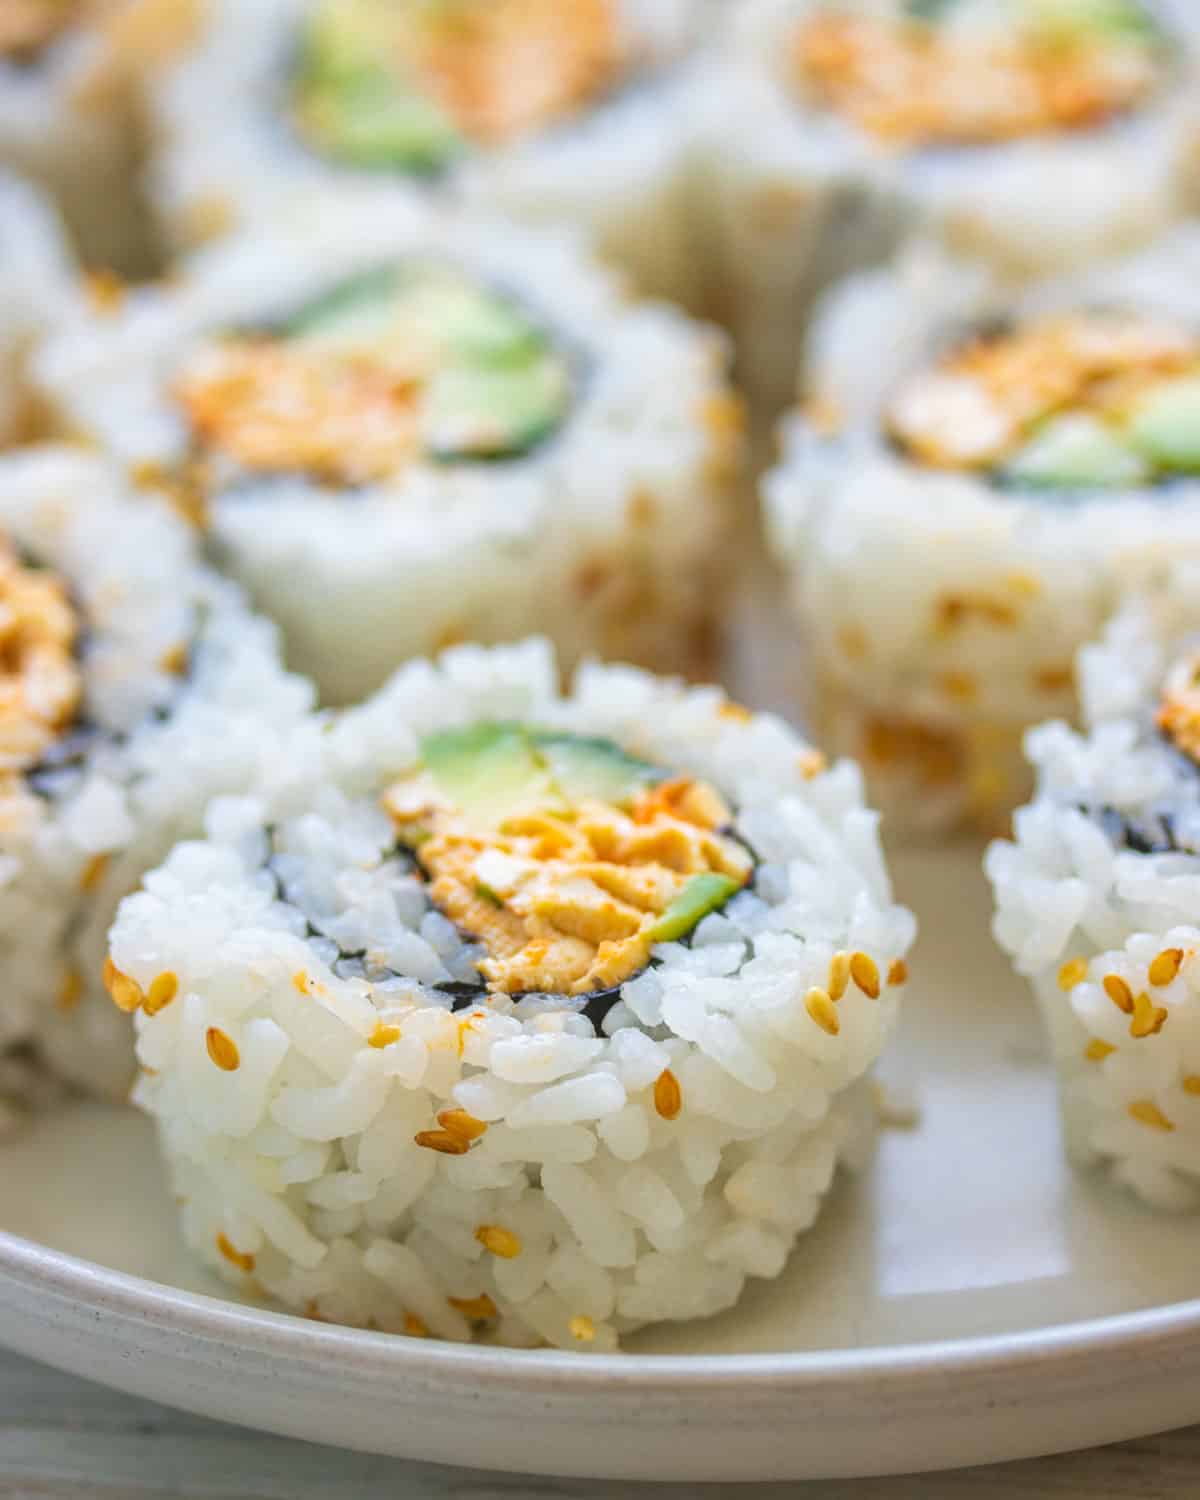 Another closeup shot of a vegan California roll, to show the cross section of ingredients.